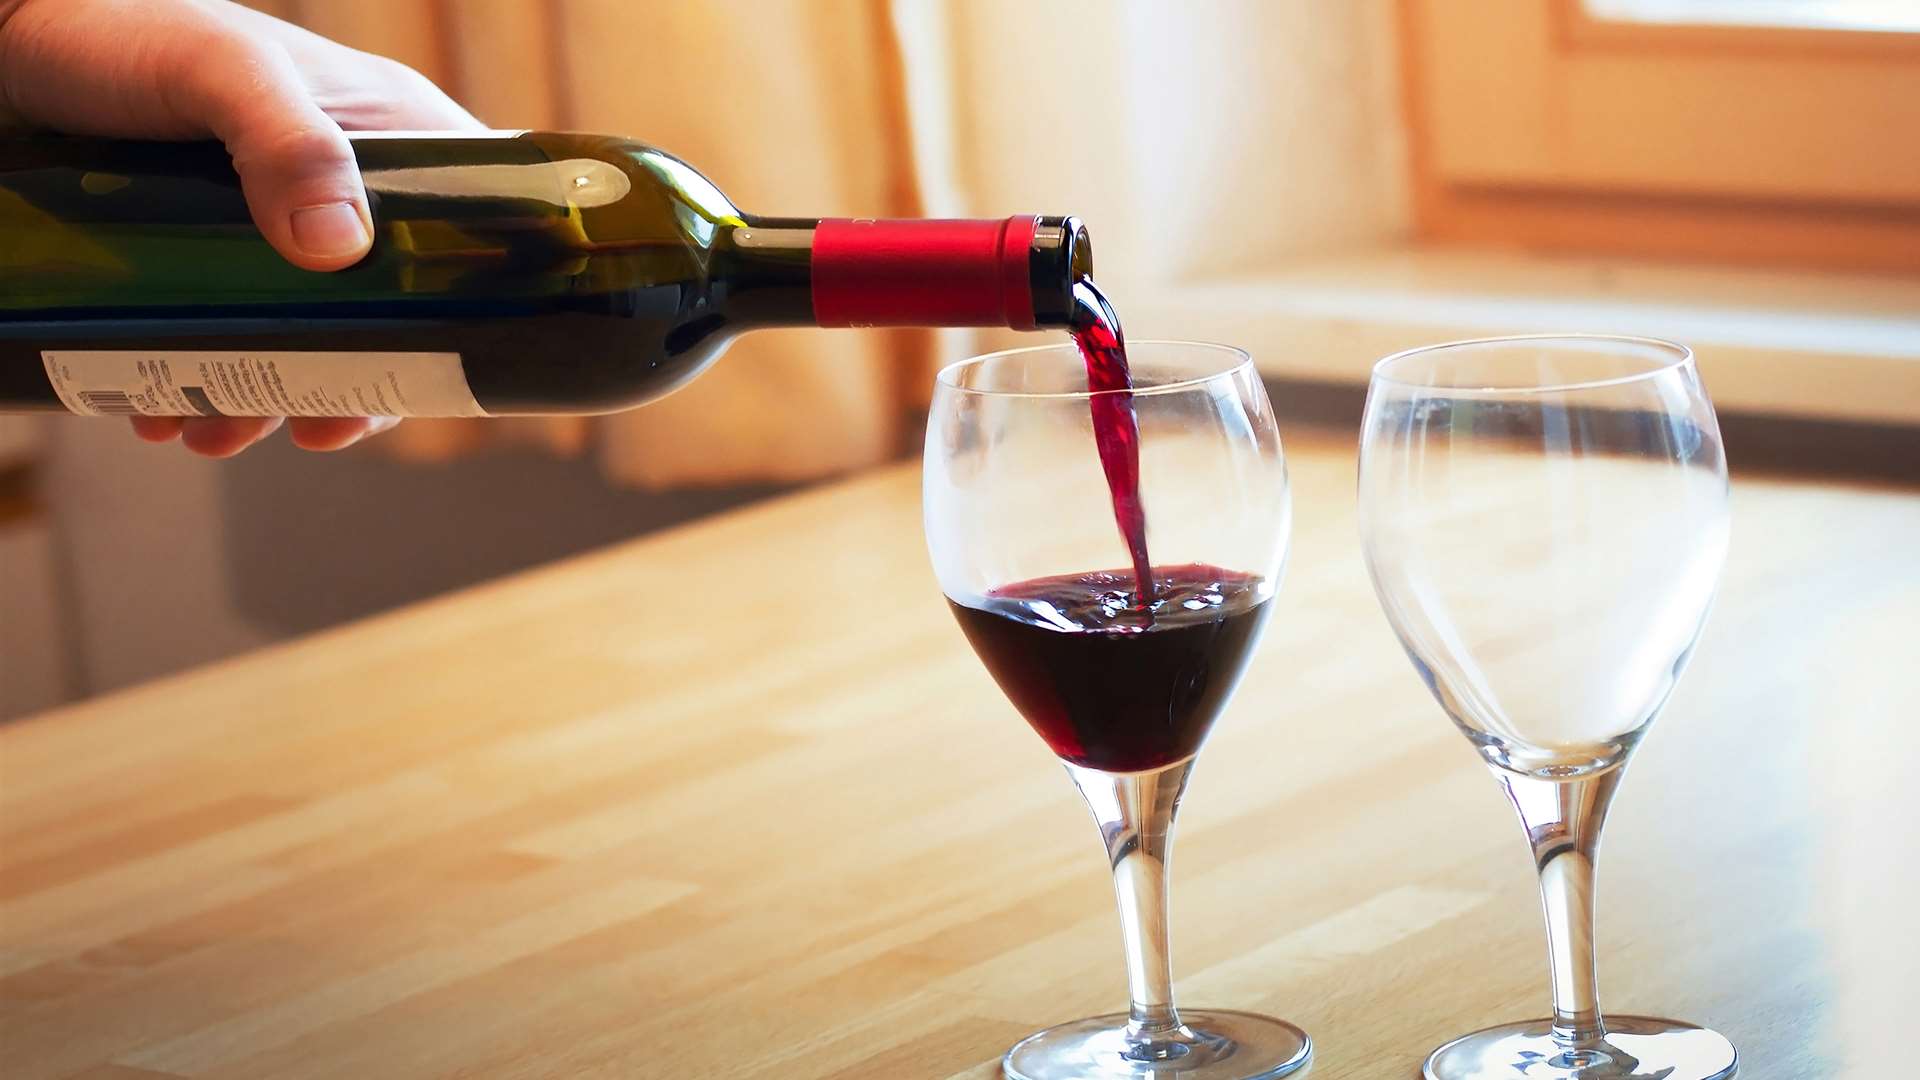 A few glasses of wine a day can seriously harm your health